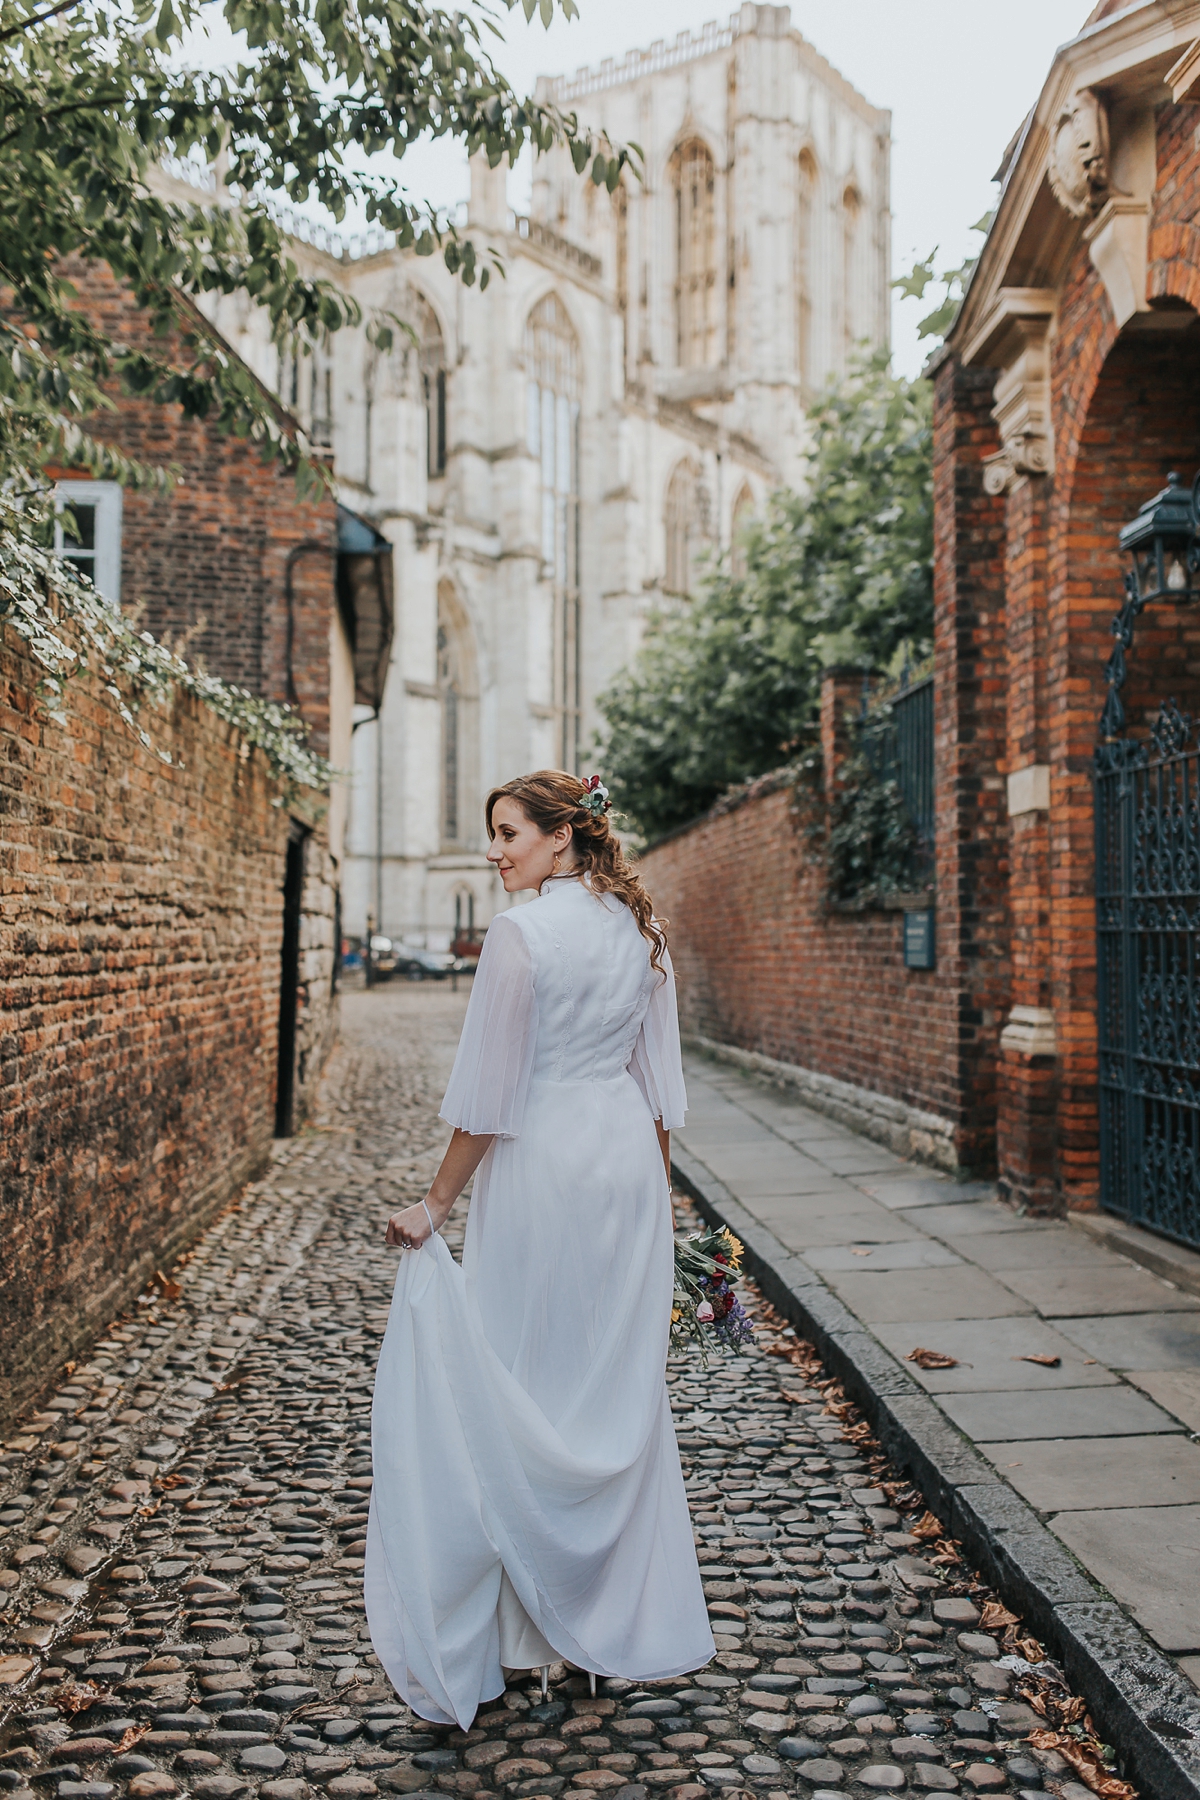 38 A vintage 1970s dress for an intimate and personal wedding in York